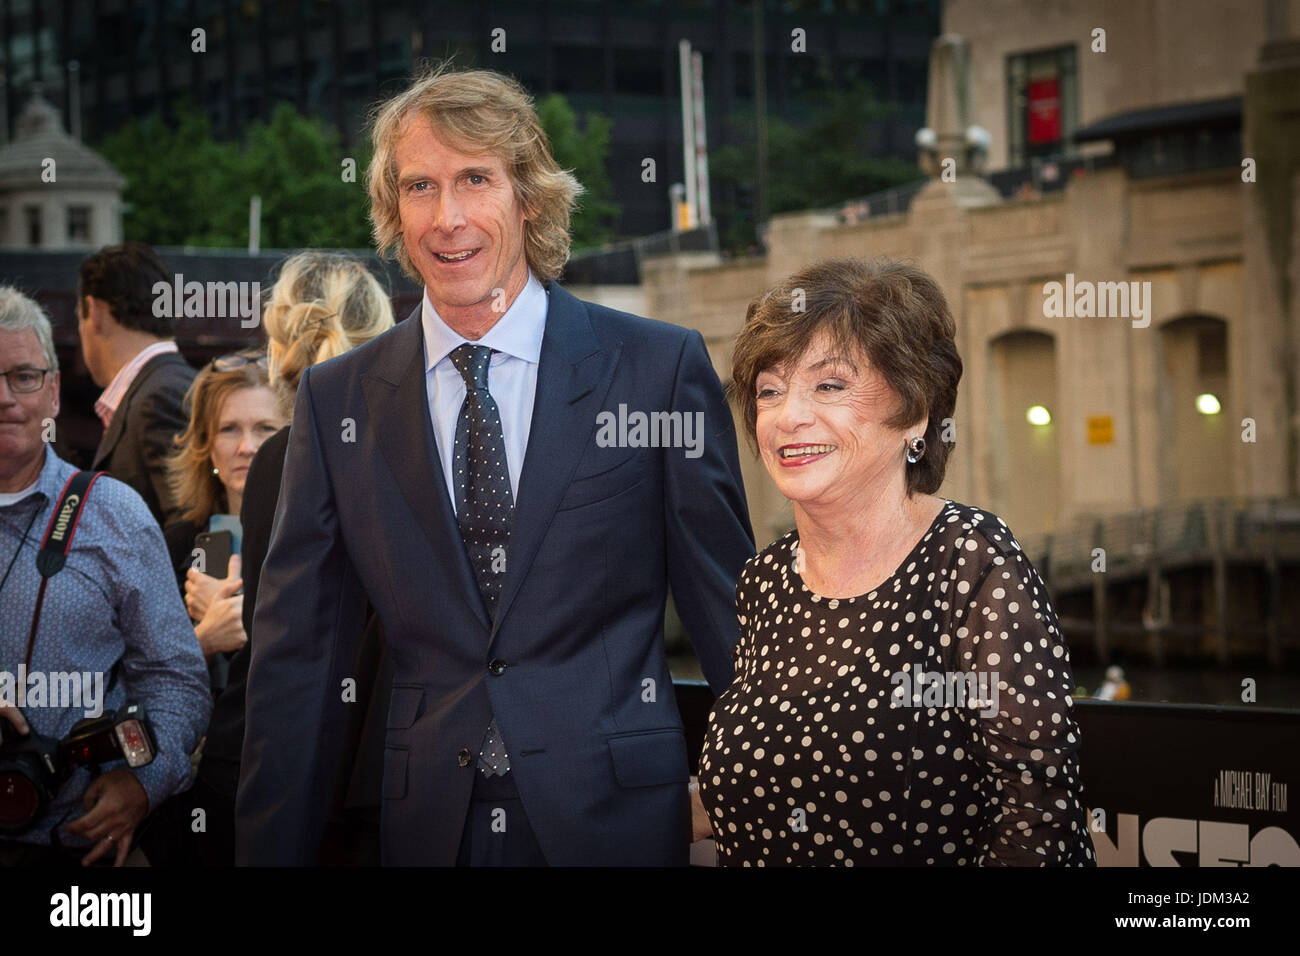 CHICAGO, IL - JUNE 20: Director and Executive Producer Michael Bay arrives with his mother, Harriet, at the U.S. Premiere of Michael Bay's 'Transformers: The Last Knight' at the Civic Opera House in Chicago, Illinois on June 20, 2017: Credit: Cindy Barrymore/MediaPunch Stock Photo